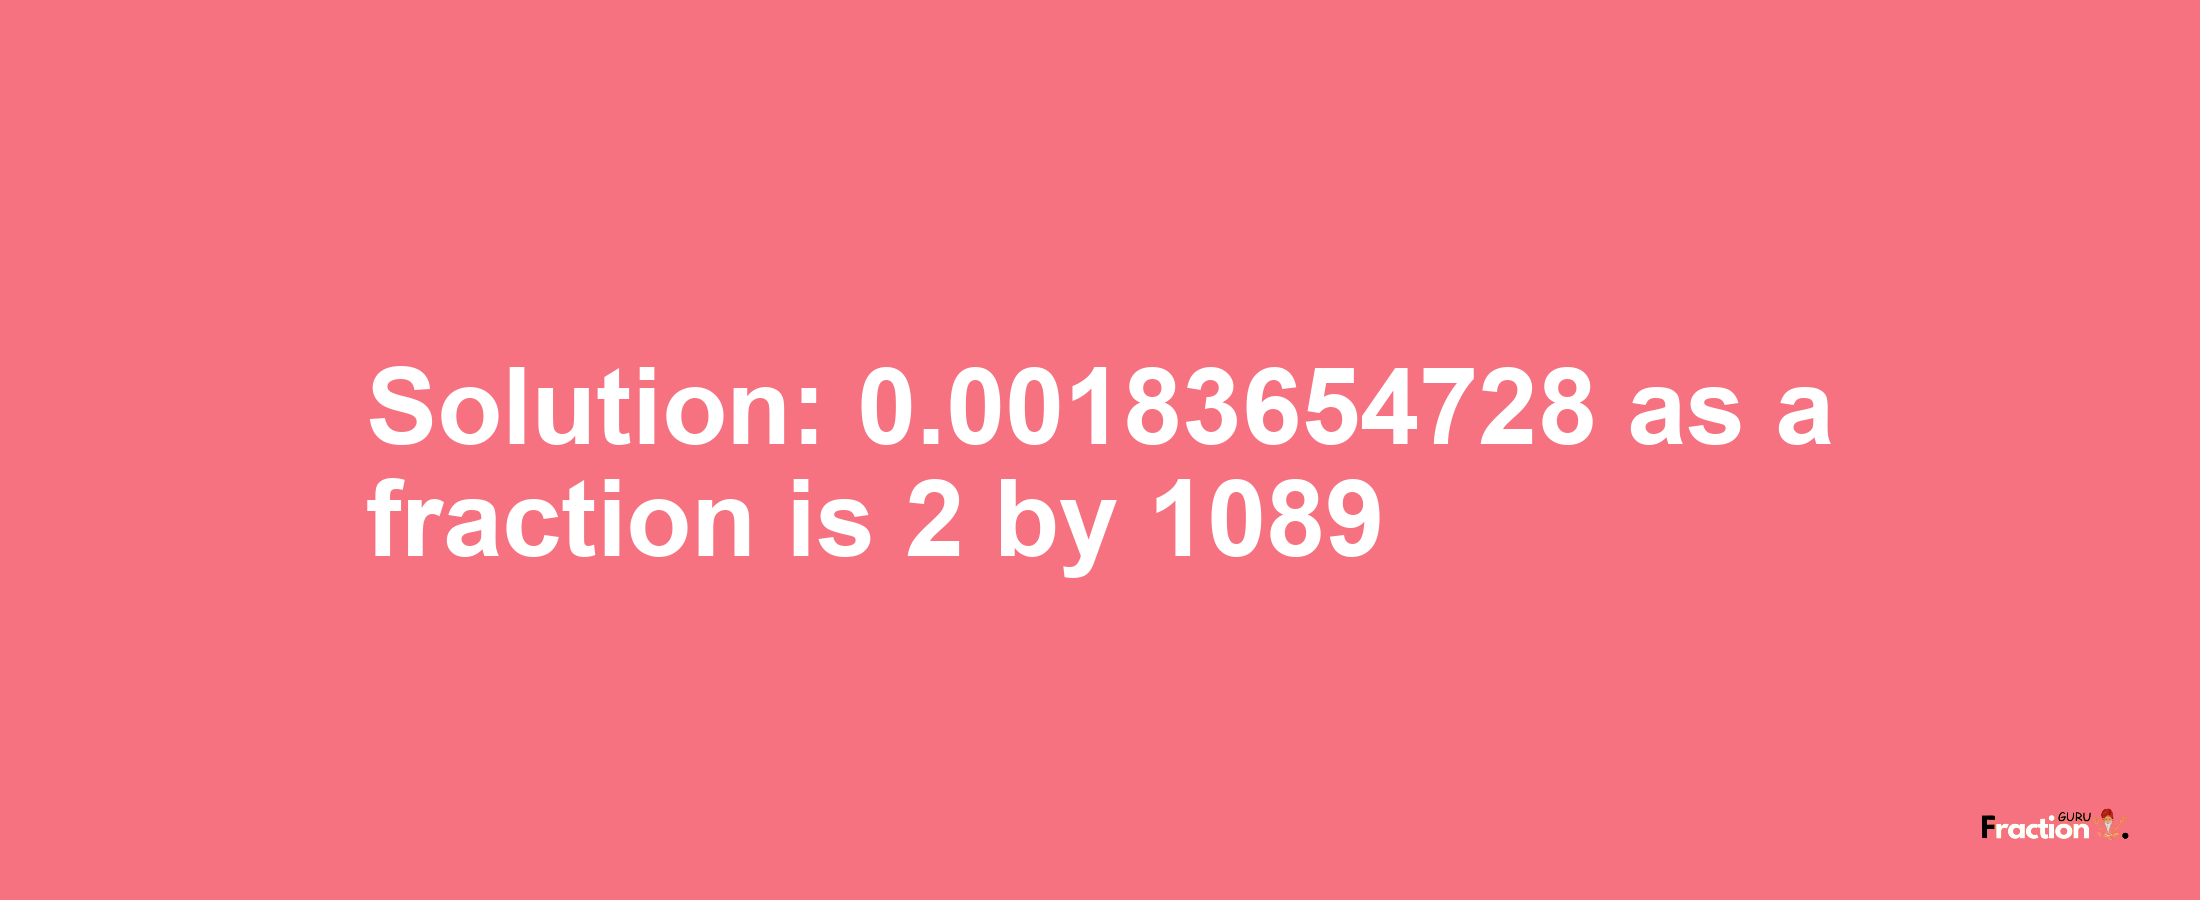 Solution:0.00183654728 as a fraction is 2/1089